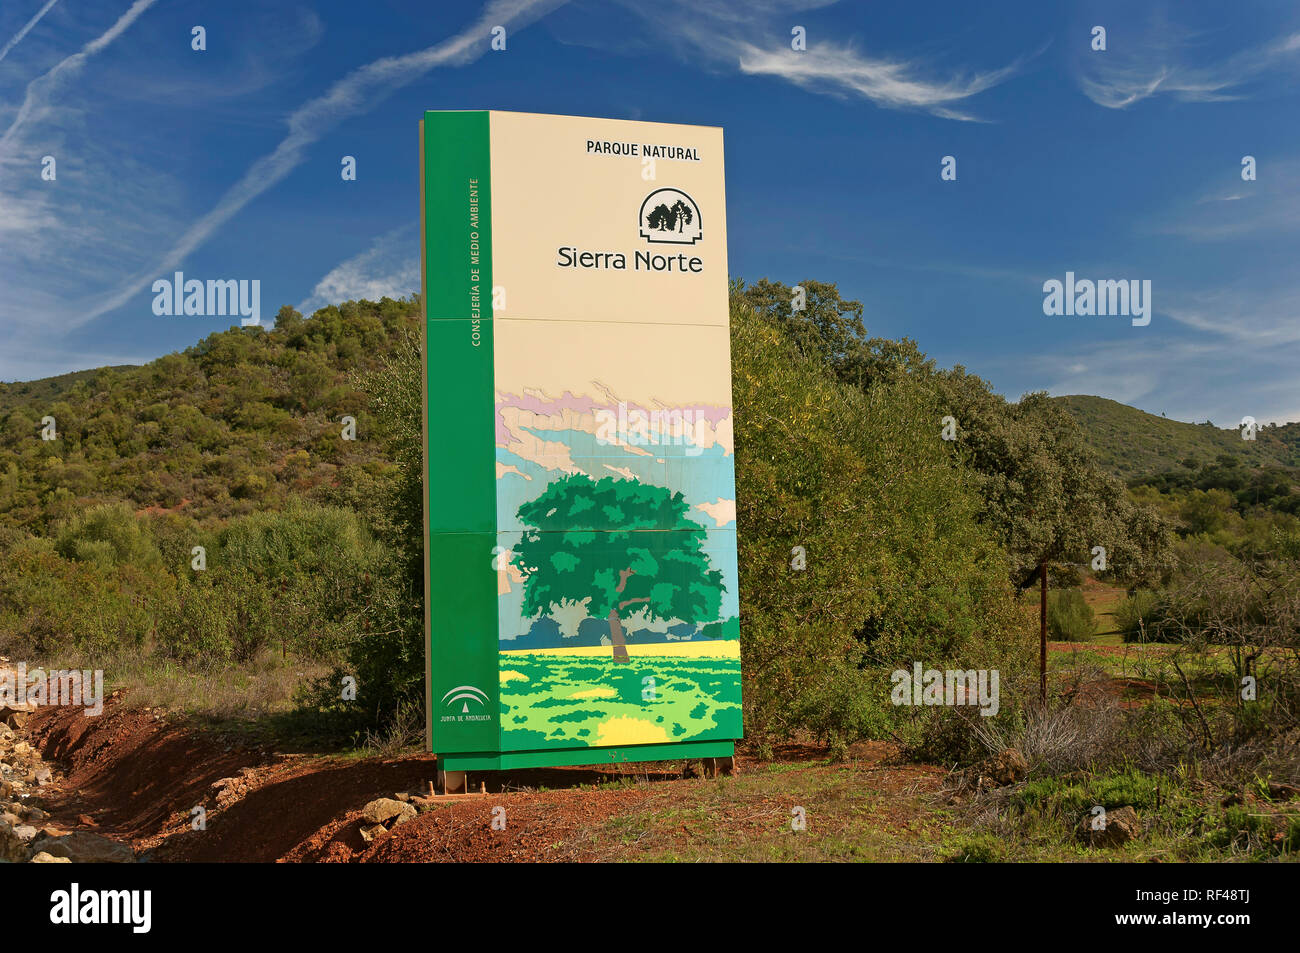 Sierra Norte Natural Park - Signage poster. San Nicolas del Puerto. Seville province. Region of Andalusia. Spain. Europe Stock Photo